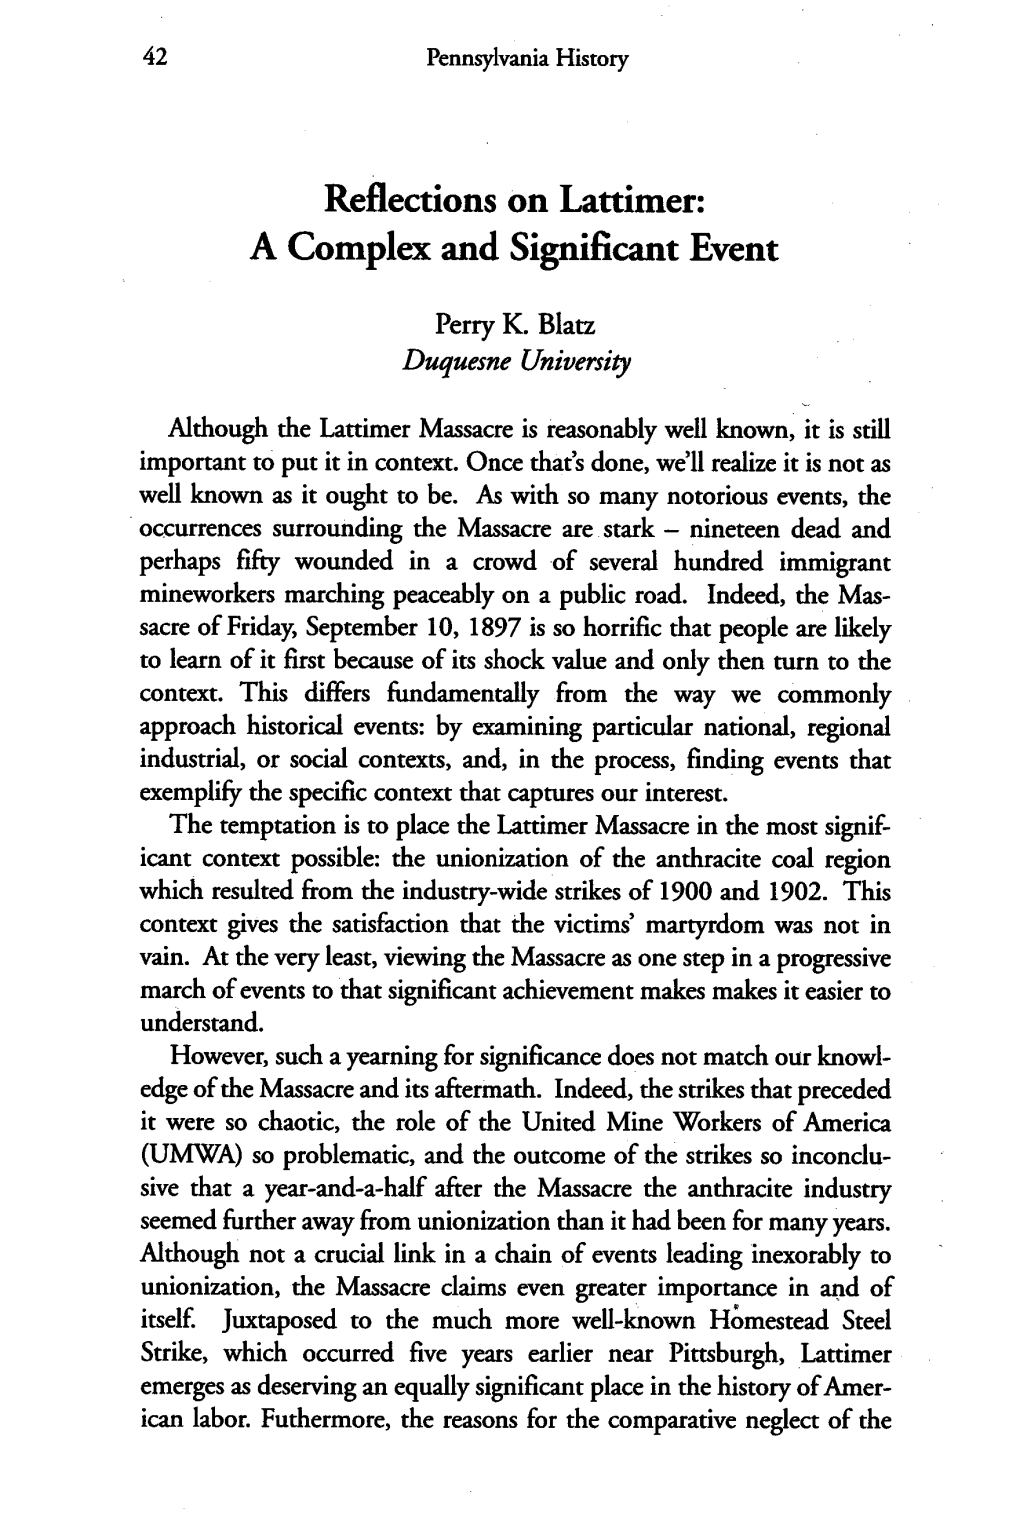 Reflections on Lattimer: a Complex and Significant Event